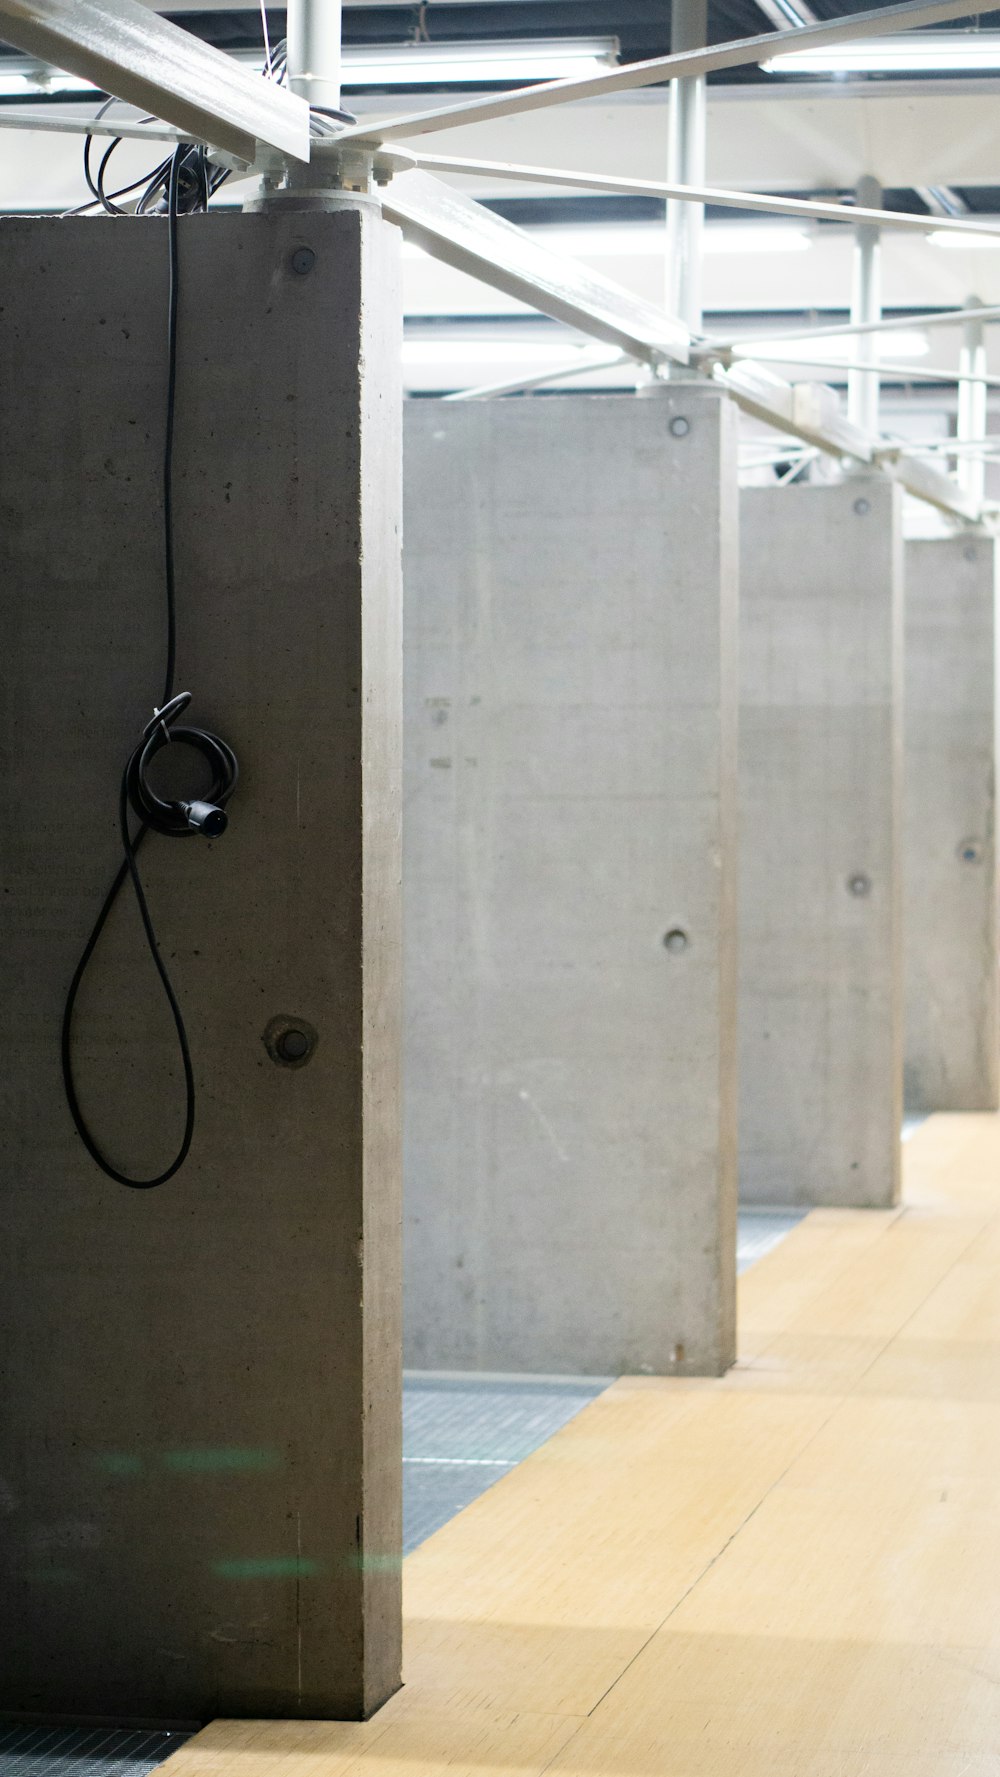 black and gray corded headphones hanging on glass wall